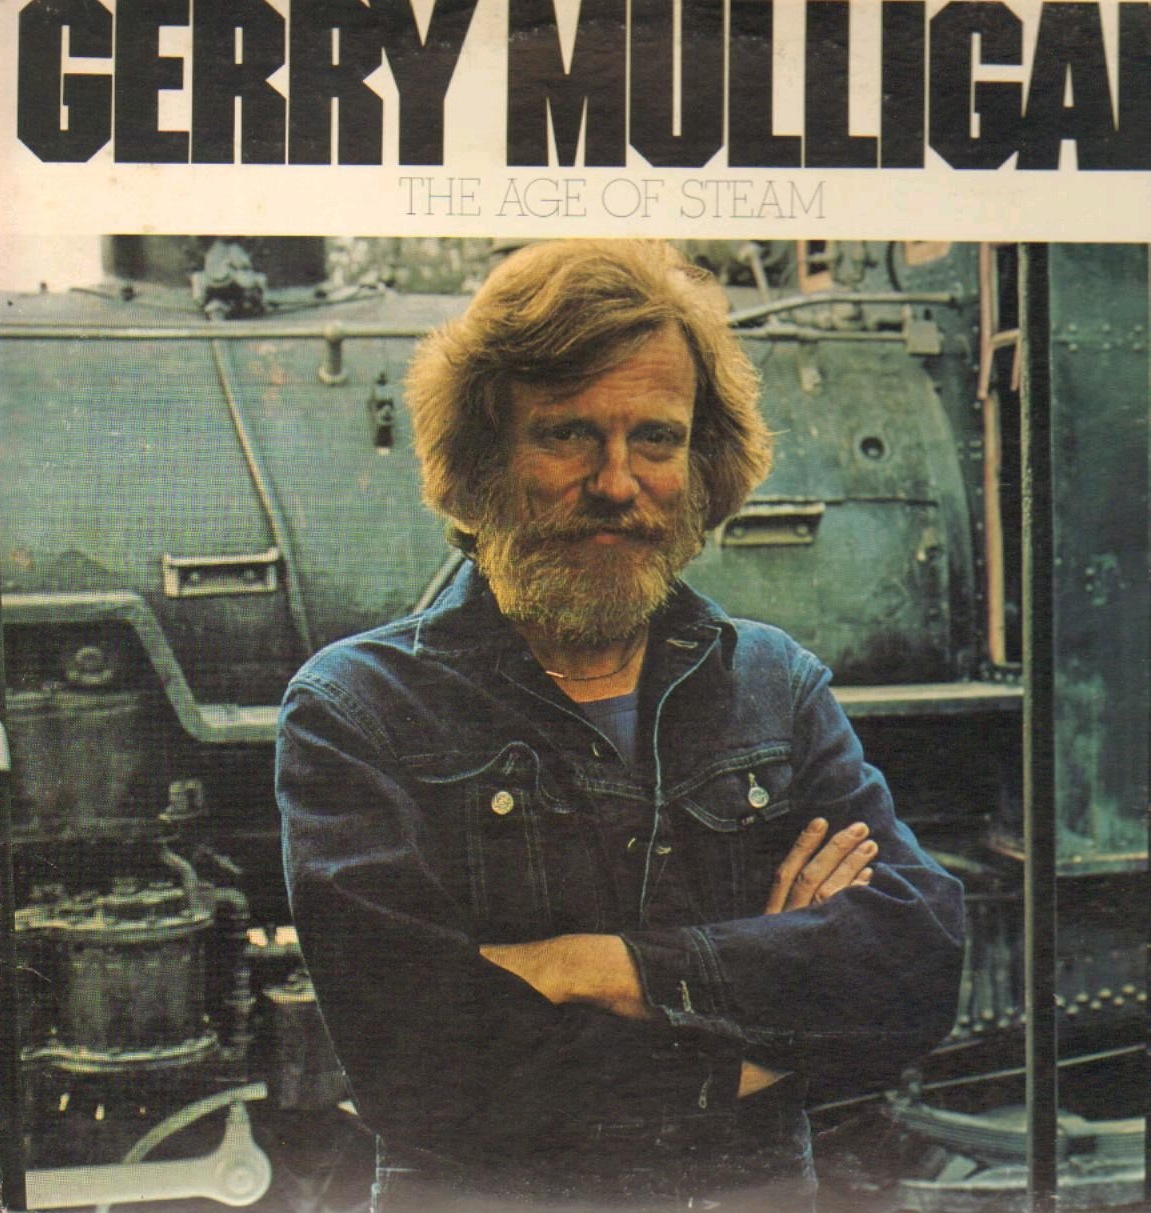 John Guerin Discography: Gerry Mulligan - The Age Of Steam